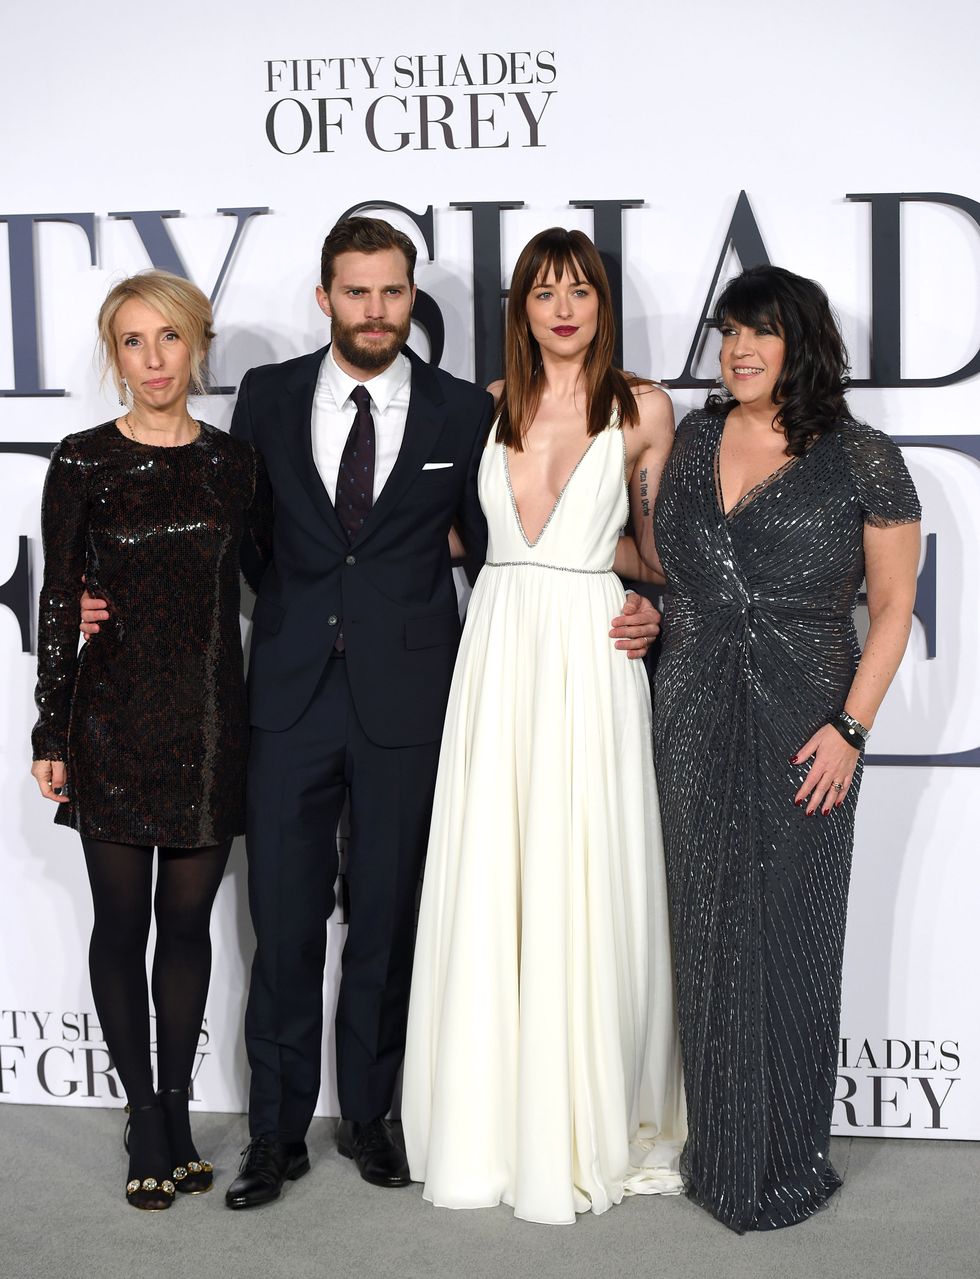 50 Shades of Grey director Sam Taylor-Johnson wishes she hadn't made the film